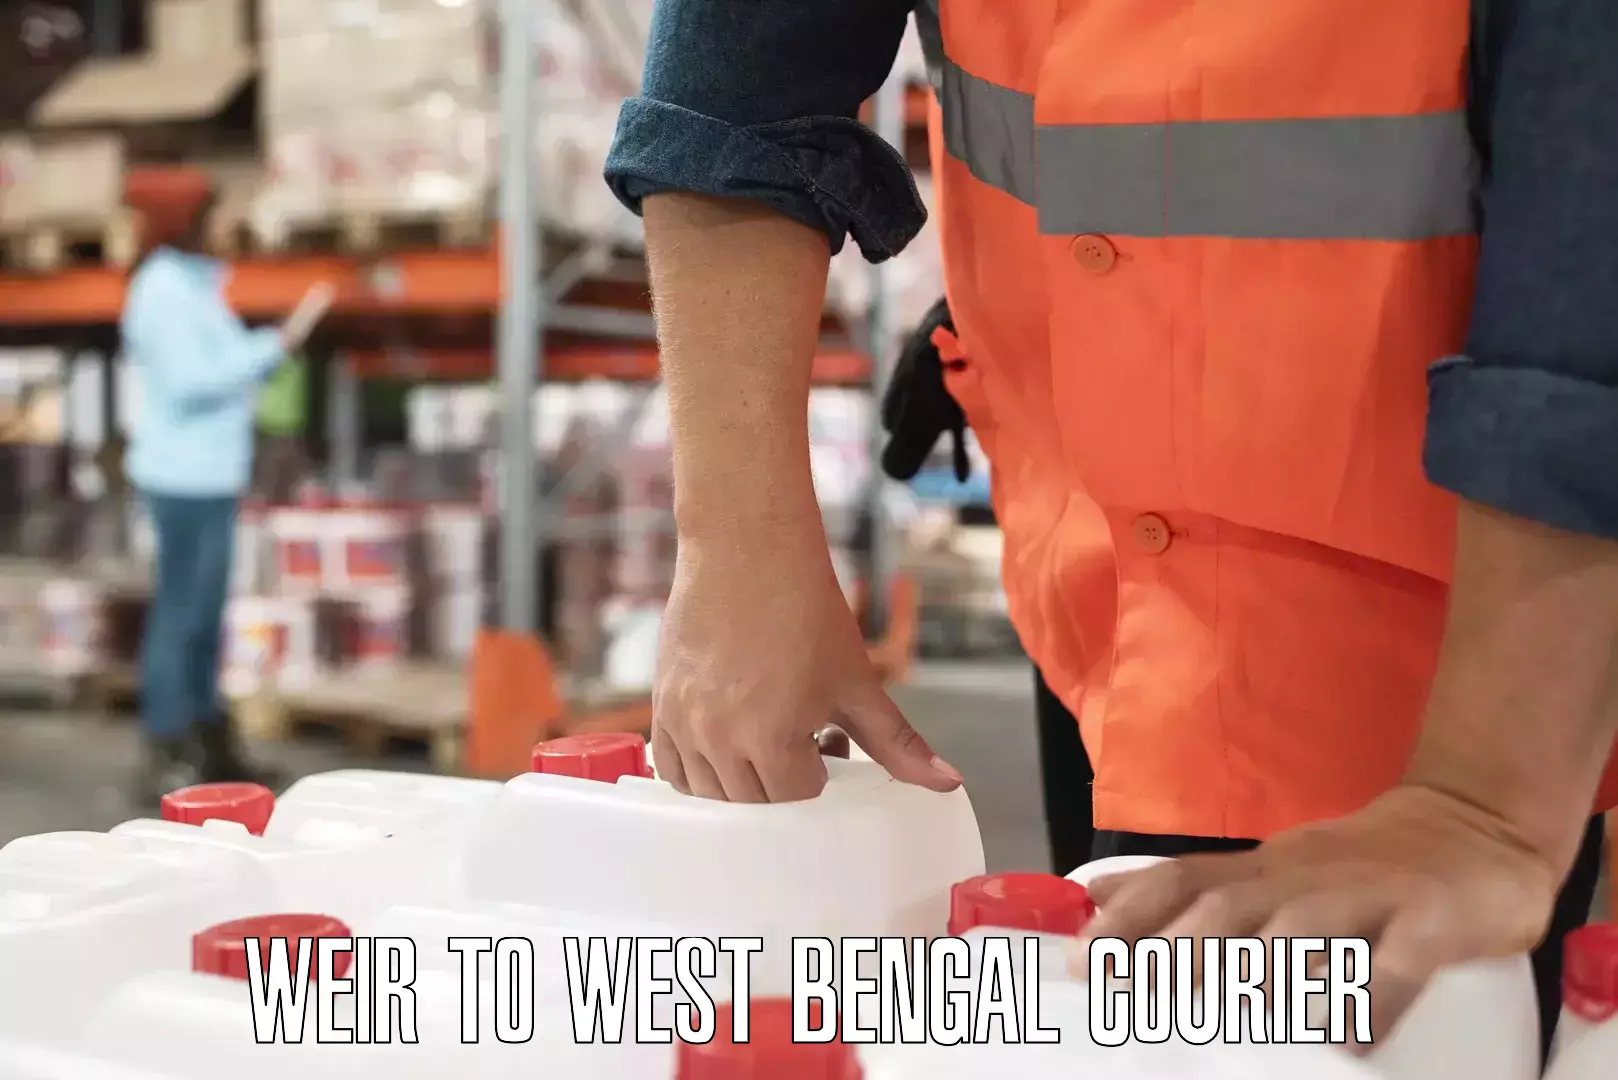 On-call courier service Weir to West Bengal